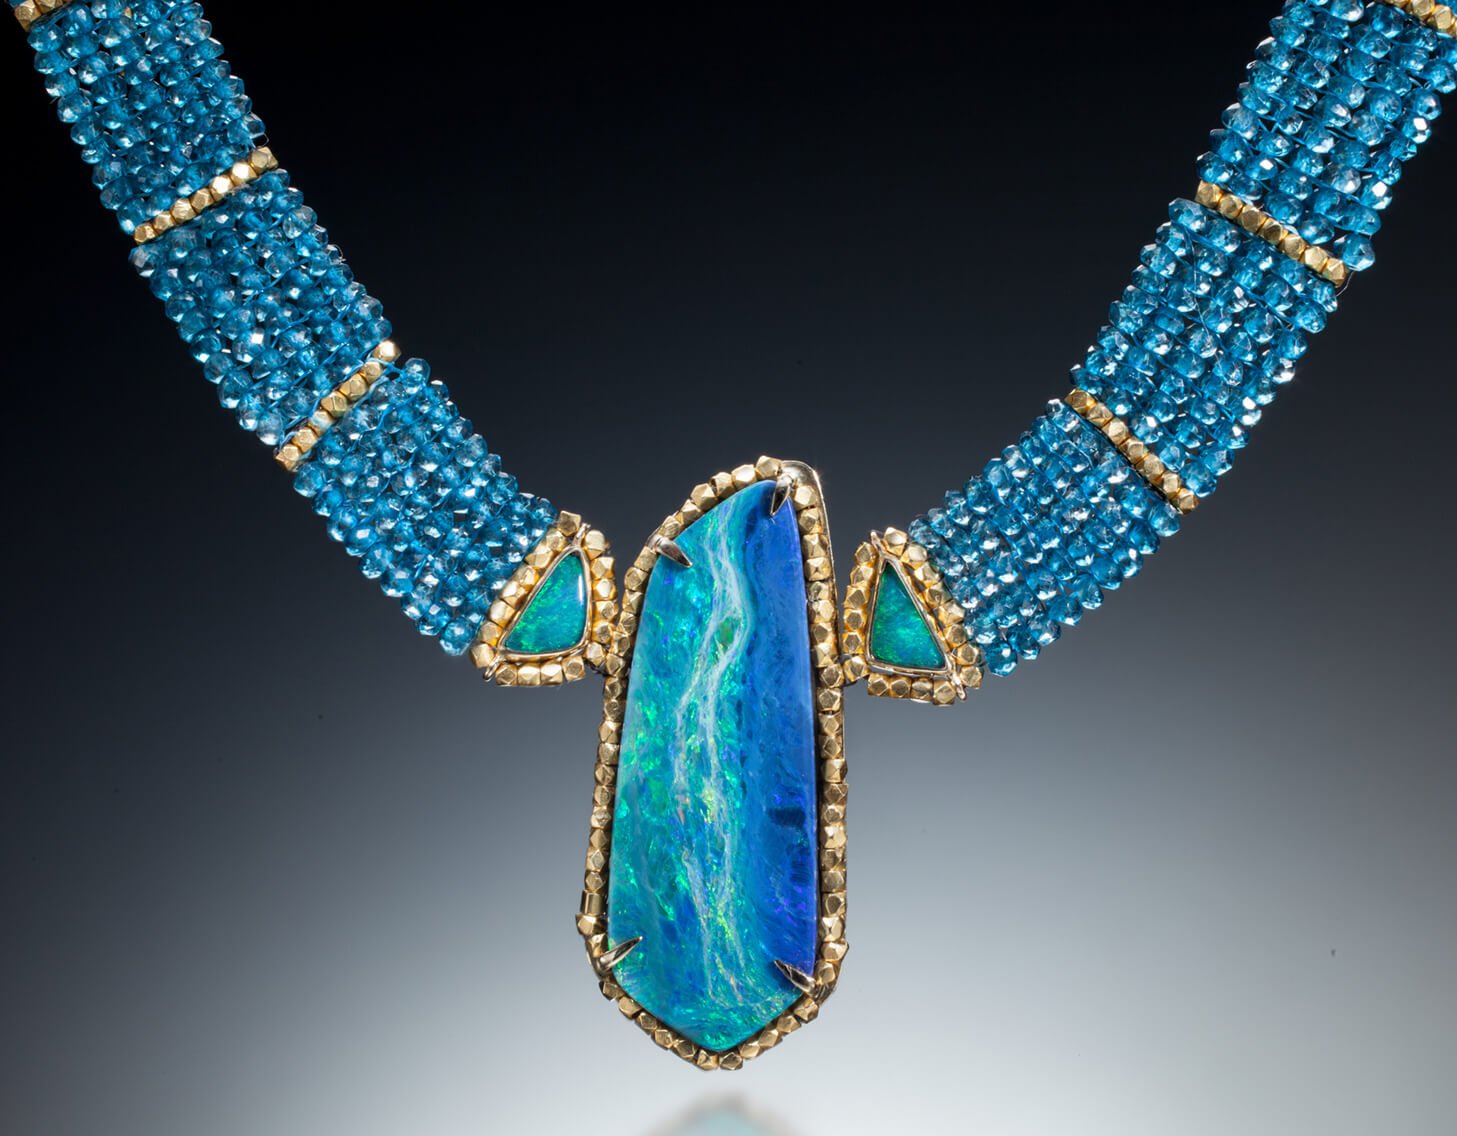 Seascape (2) This collar is hand woven of apatite and 18k gold beads. The three bezels are fabricated of 18k gold, set with three Australian opals.